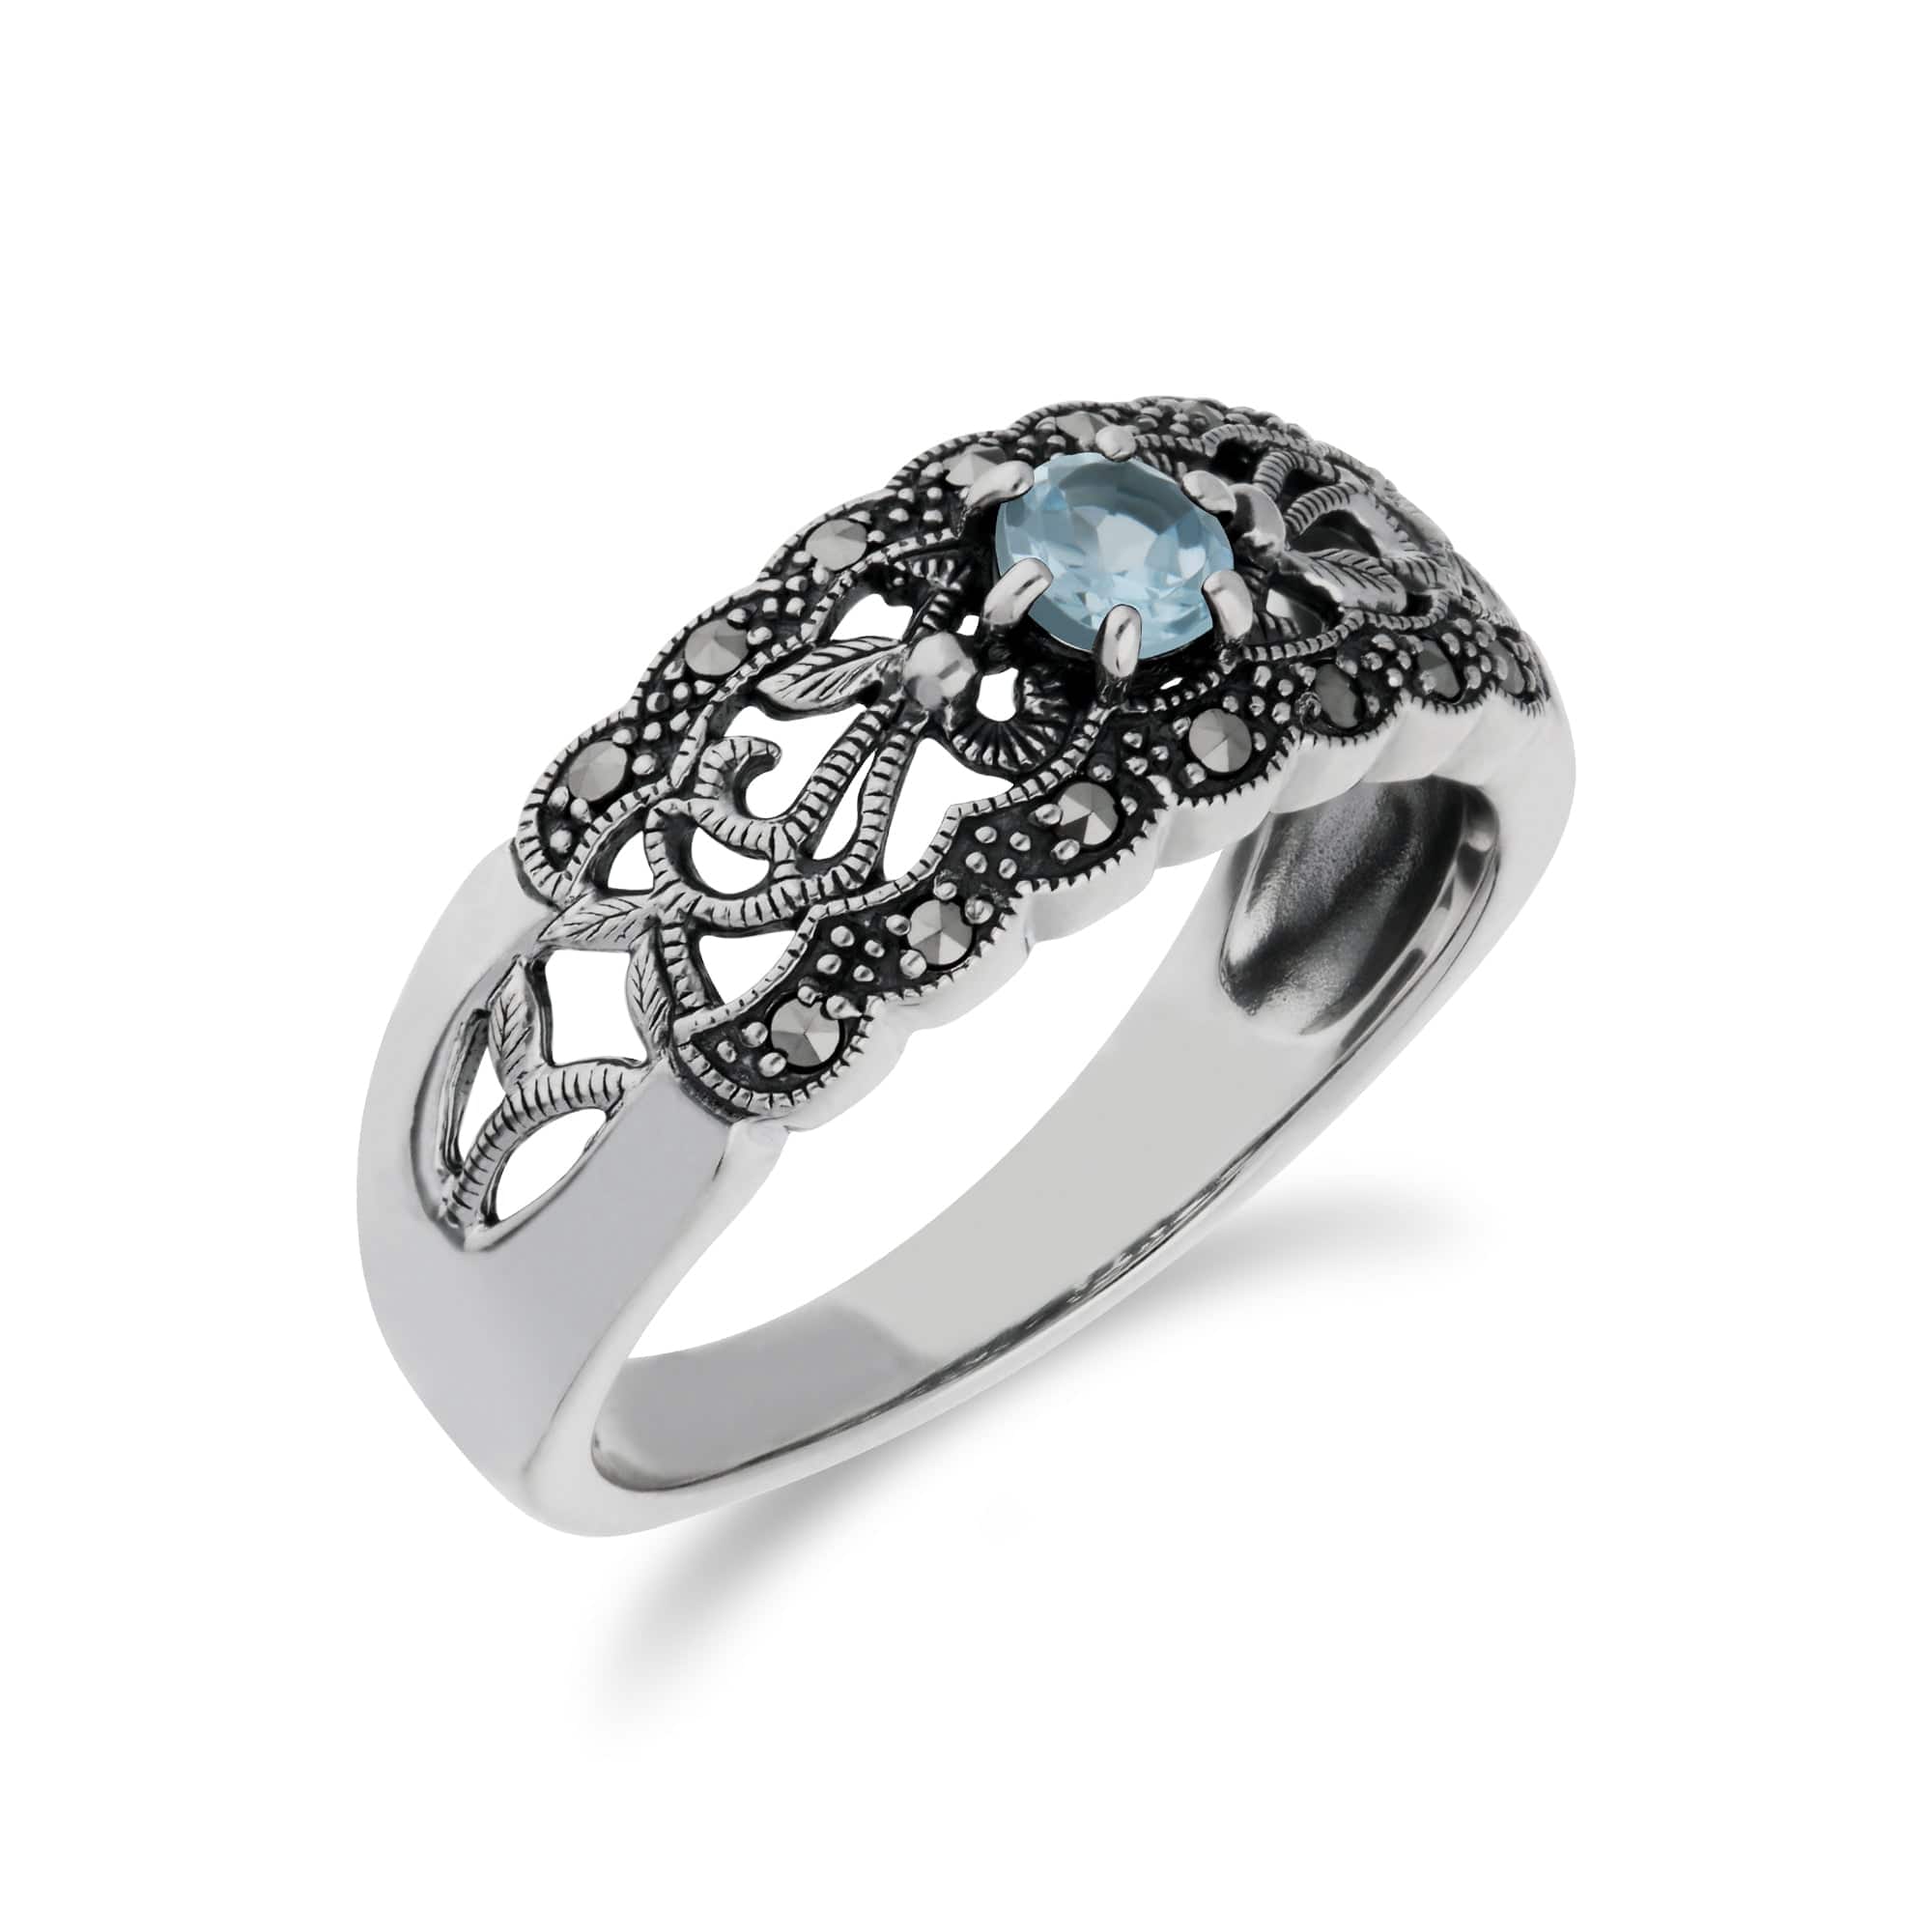 214R597702925 Art Nouveau Style Round Blue Topaz & Marcasite Floral Band Ring in Sterling Silver 3